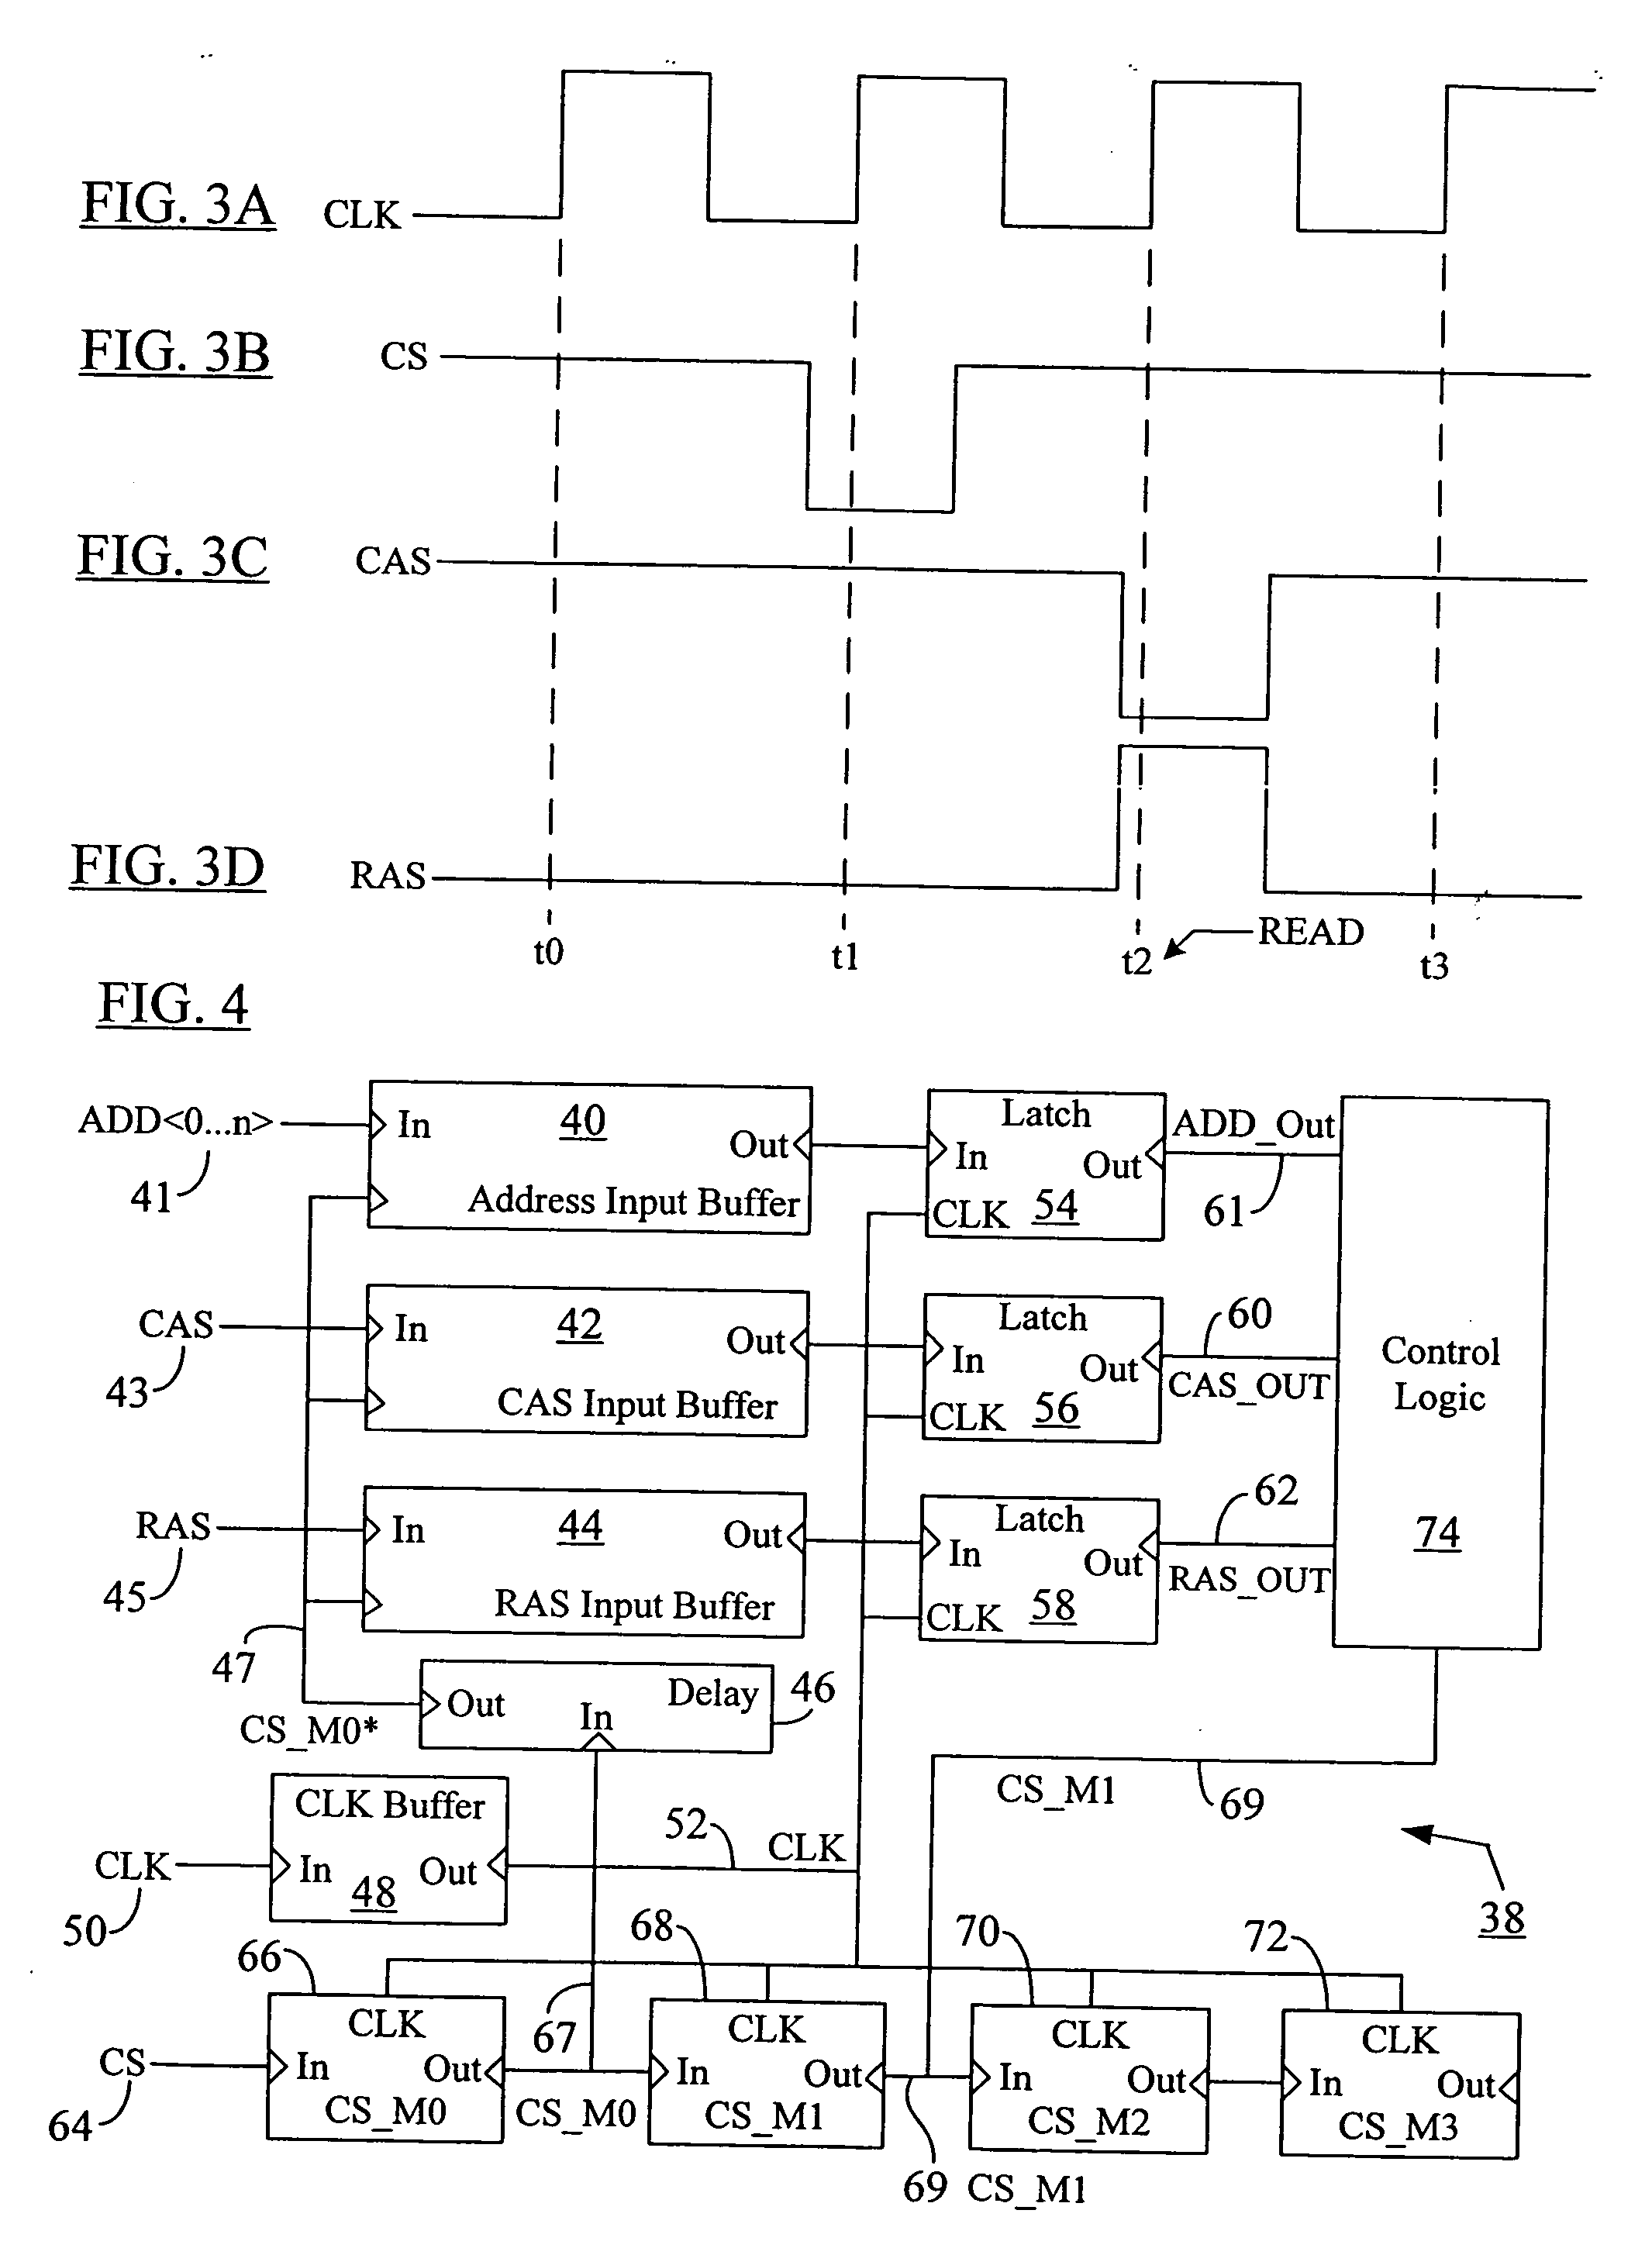 Low power chip select (CS) latency option